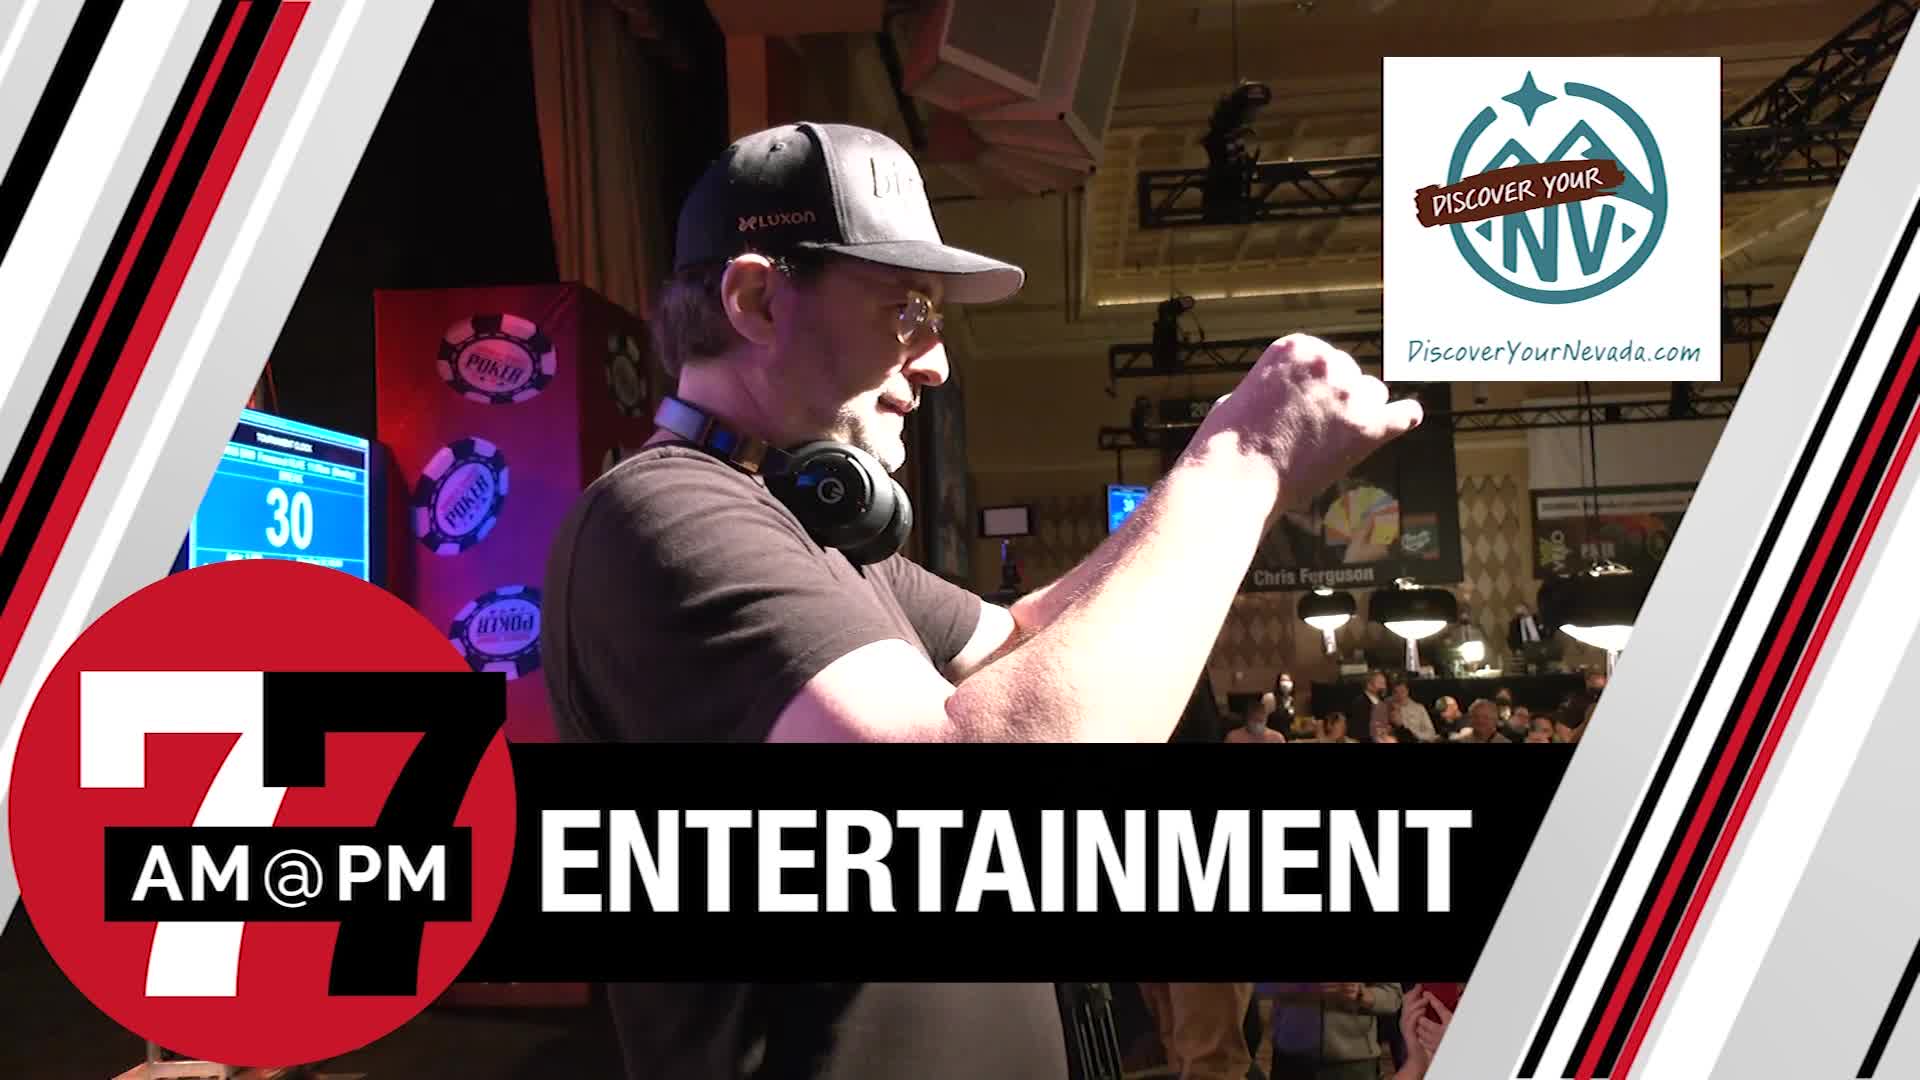 7@7PM Phil Hellmuth Avenges Loss to Tom Dwan